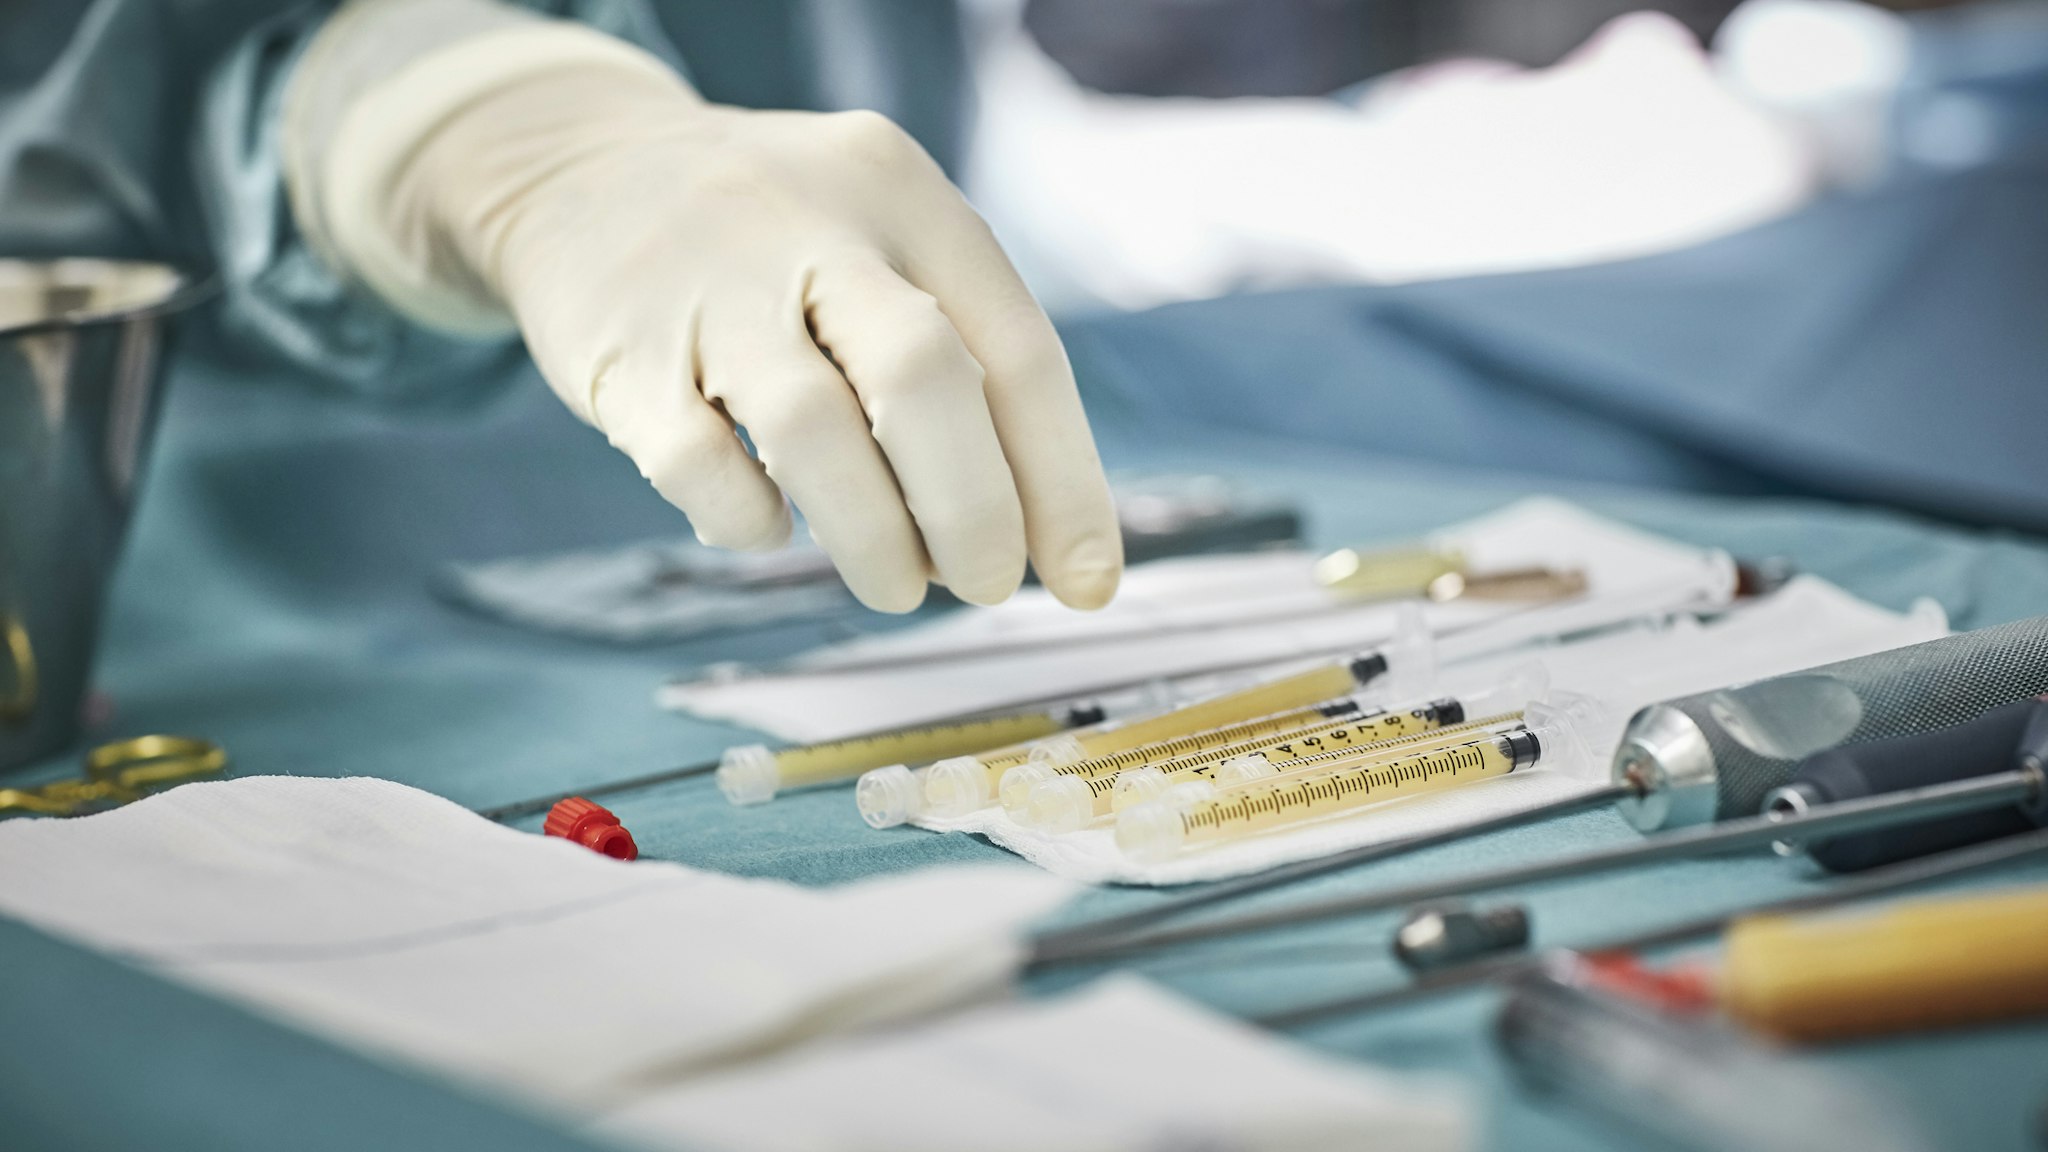 Cropped image of female surgeon reaching for syringes on table. Close-up of healthcare worker's hand wearing surgical glove. She is in emergency room